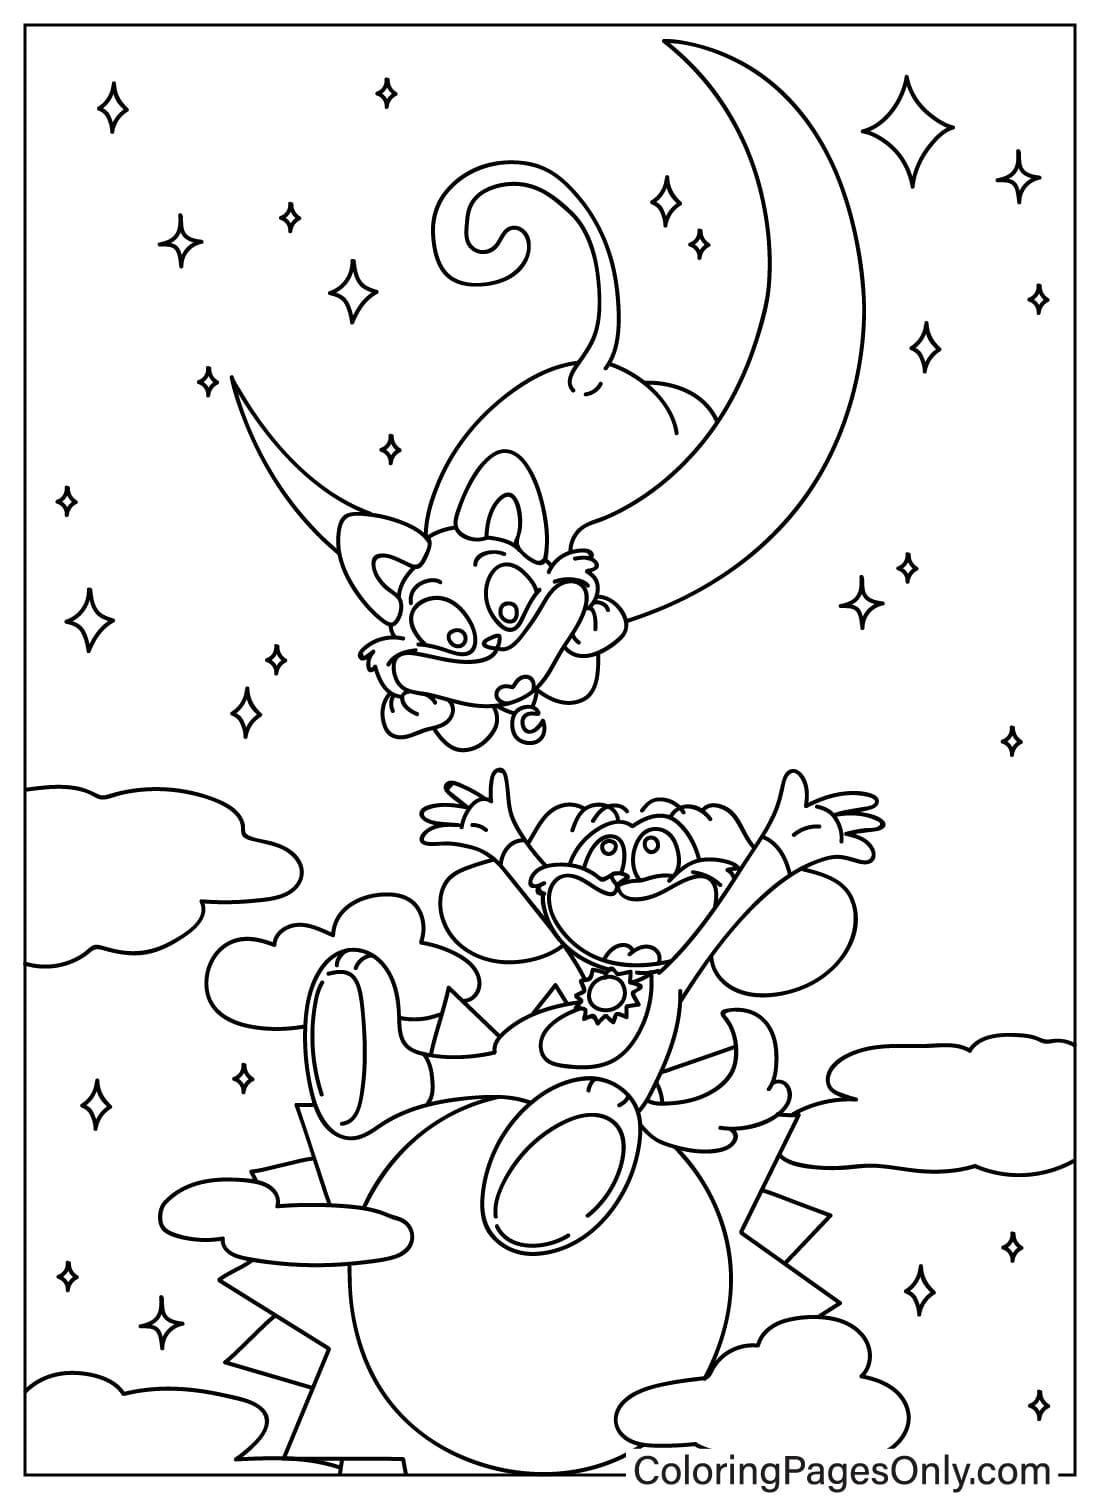 CatNap, DogDay Coloring Page Free from DogDay